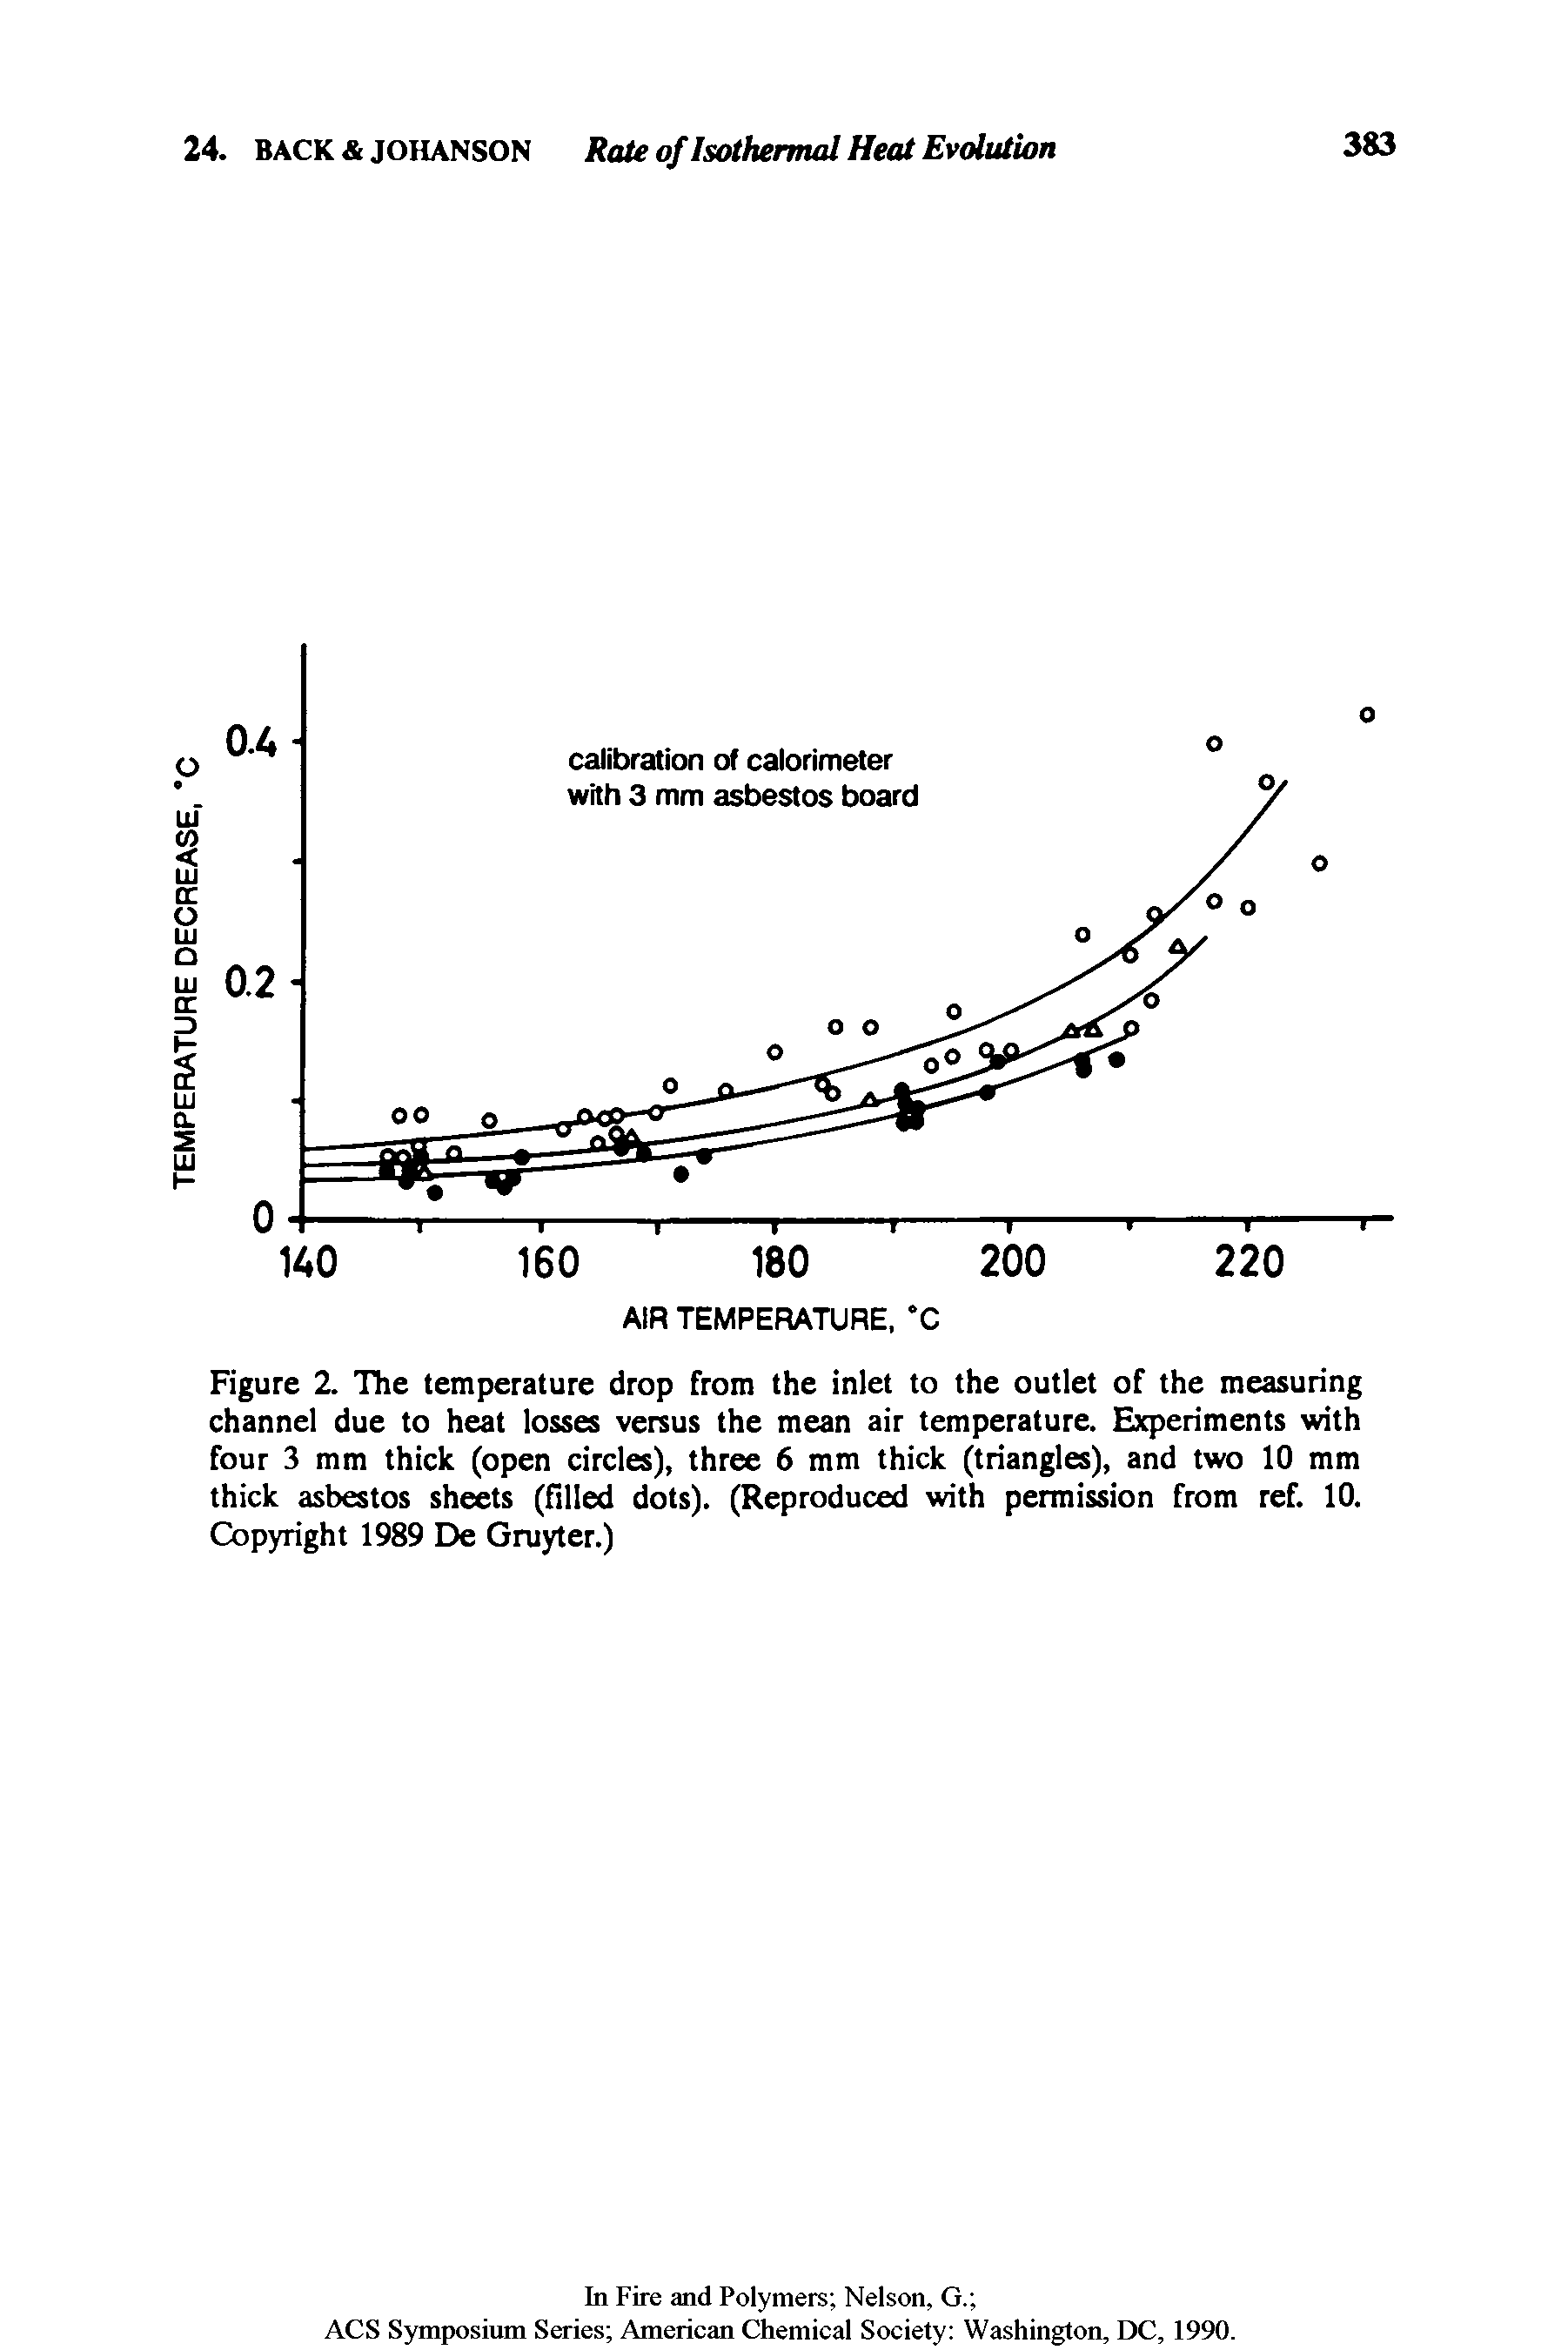 Figure 2. The temperature drop from the inlet to the outlet of the measuring channel due to heat losses versus the mean air temperature. Experiments with four 3 mm thick (open circles), three 6 mm thick (triangles), and two 10 mm thick asbestos sheets (filled dots). (Reproduced with permission from ref. 10. Copyright 1989 De Gruyter.)...